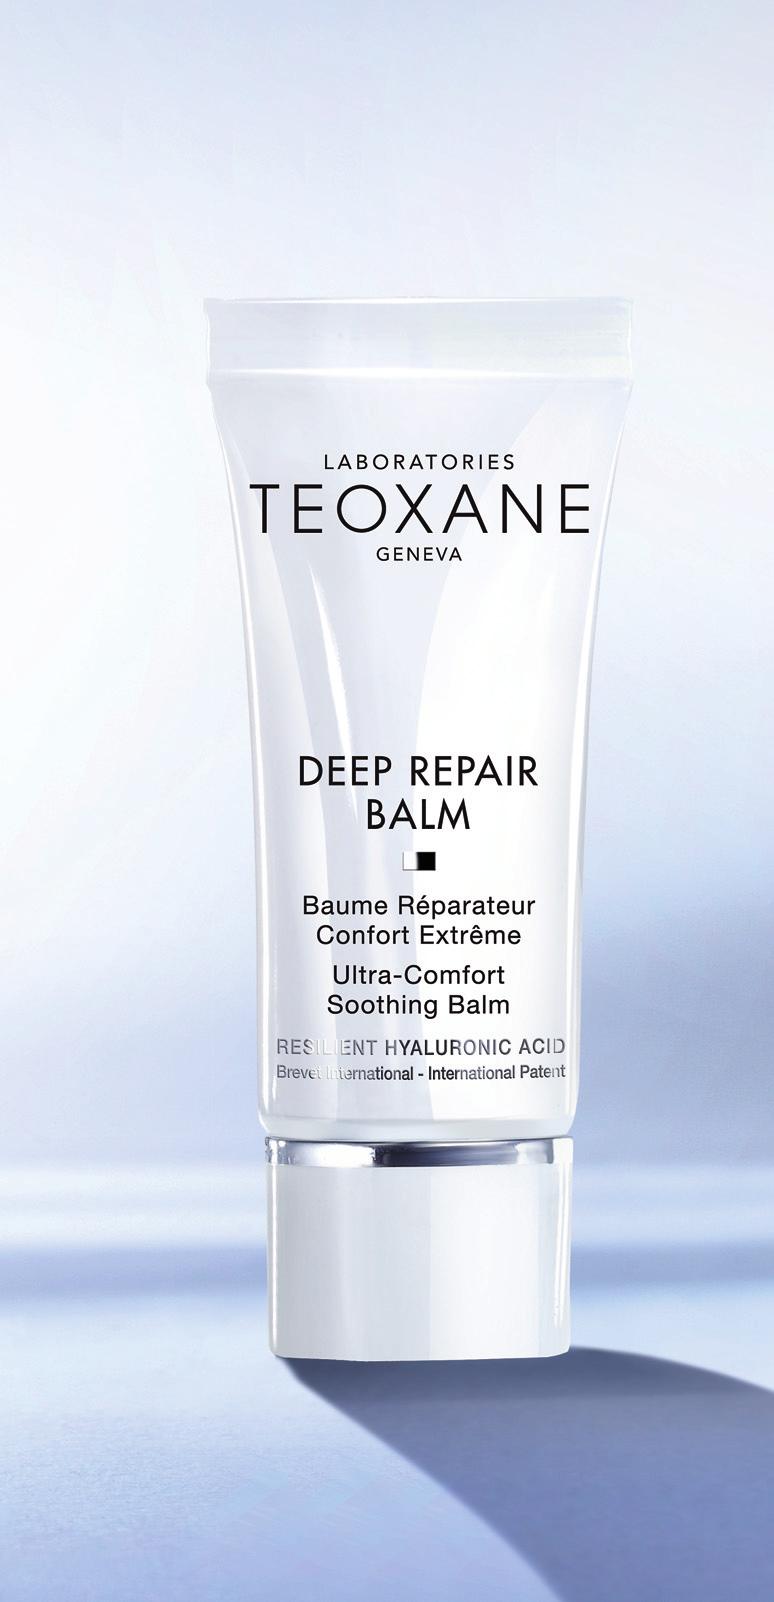 DEEP REPAIR BALM - 30ml ULTRA-COMFORT SOOTHING BALM TARGETED SKINCARE RHA provides specific hydration Arnica extract with soothing and anti-inflammatory properties Neutrazen promotes skin